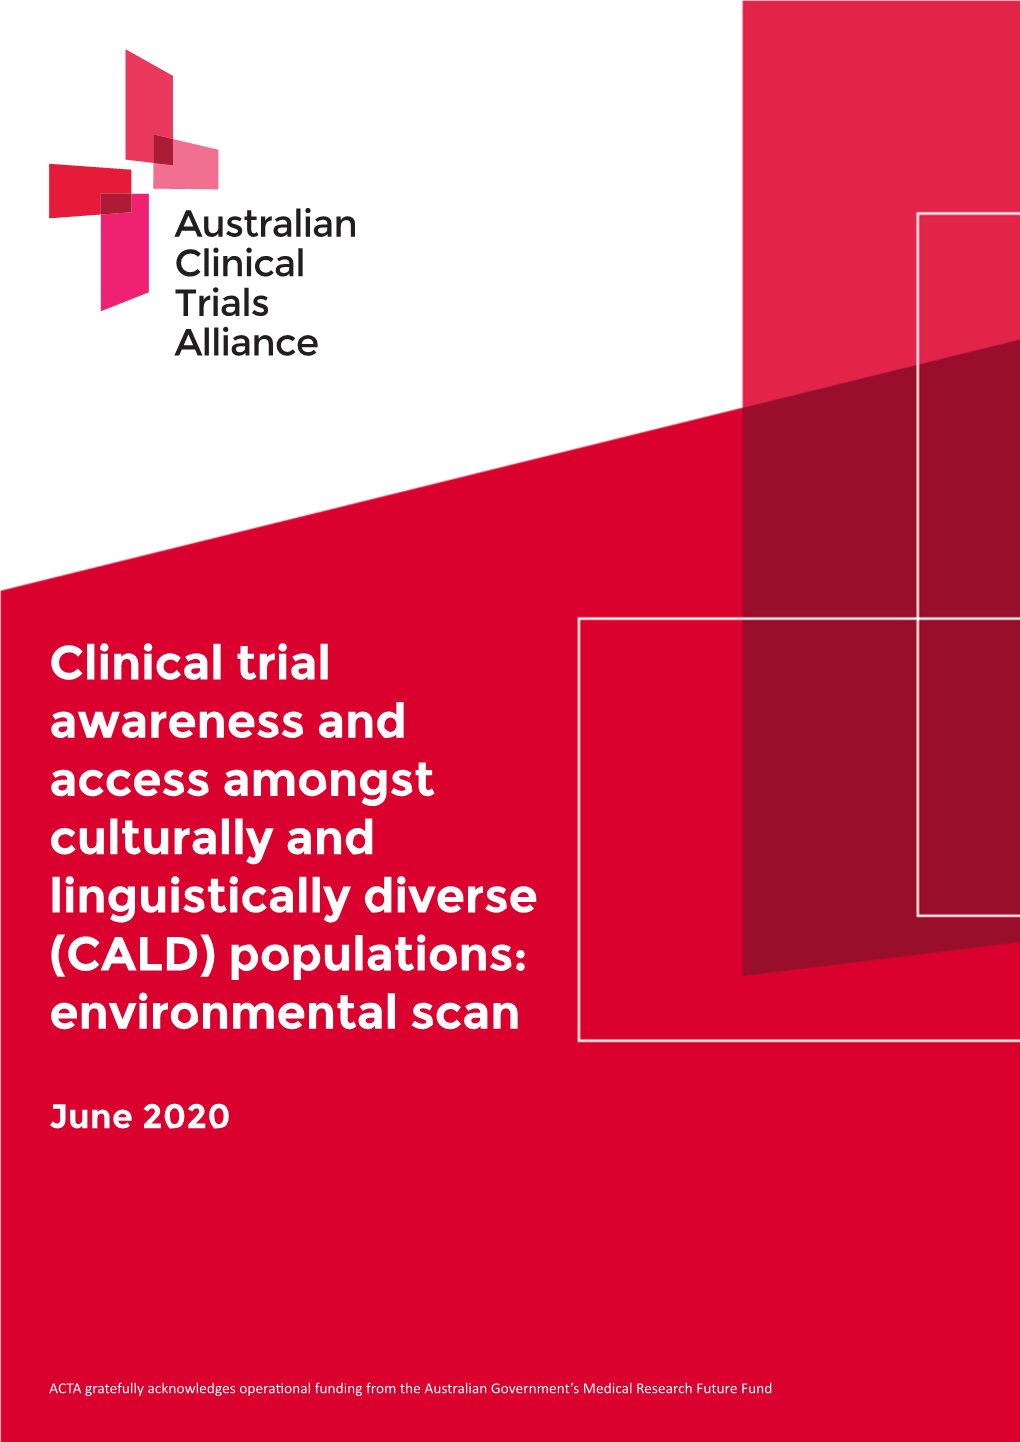 Clinical Trial Awareness and Access Amongst Culturally and Linguistically Diverse (CALD) Populations: Environmental Scan